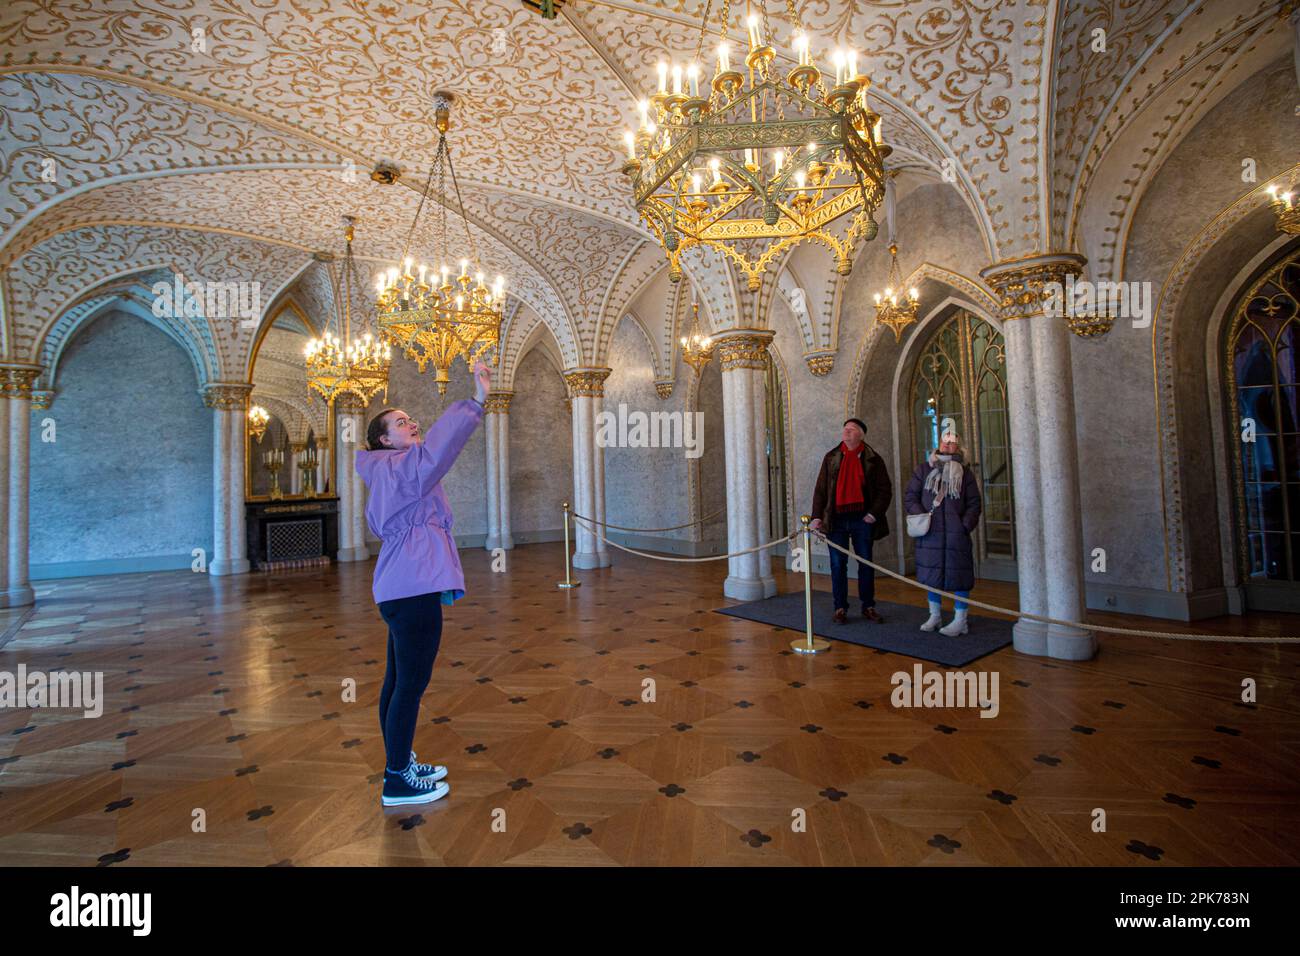 Guide with tourists showing the Interior of Rosenau Palace , birthplace of Prince Albert, consort of Queen Victoria, Coburg, Bavaria, Germany, Europe Stock Photo